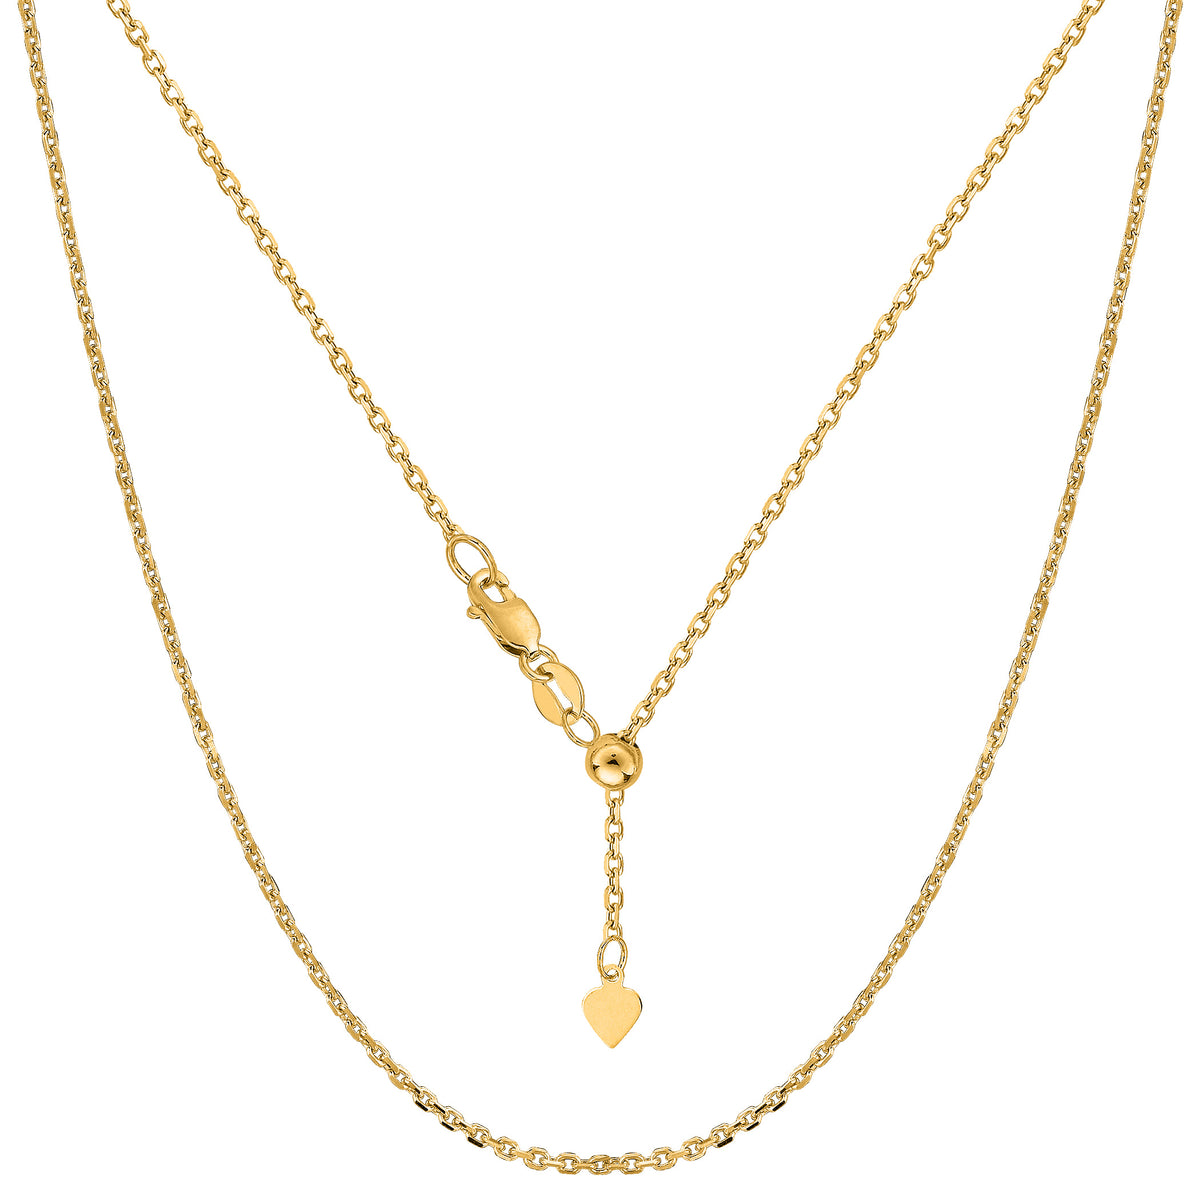 14k Yellow Gold Adjustable Cable Chain Necklace, 0.9mm, 22" fine designer jewelry for men and women